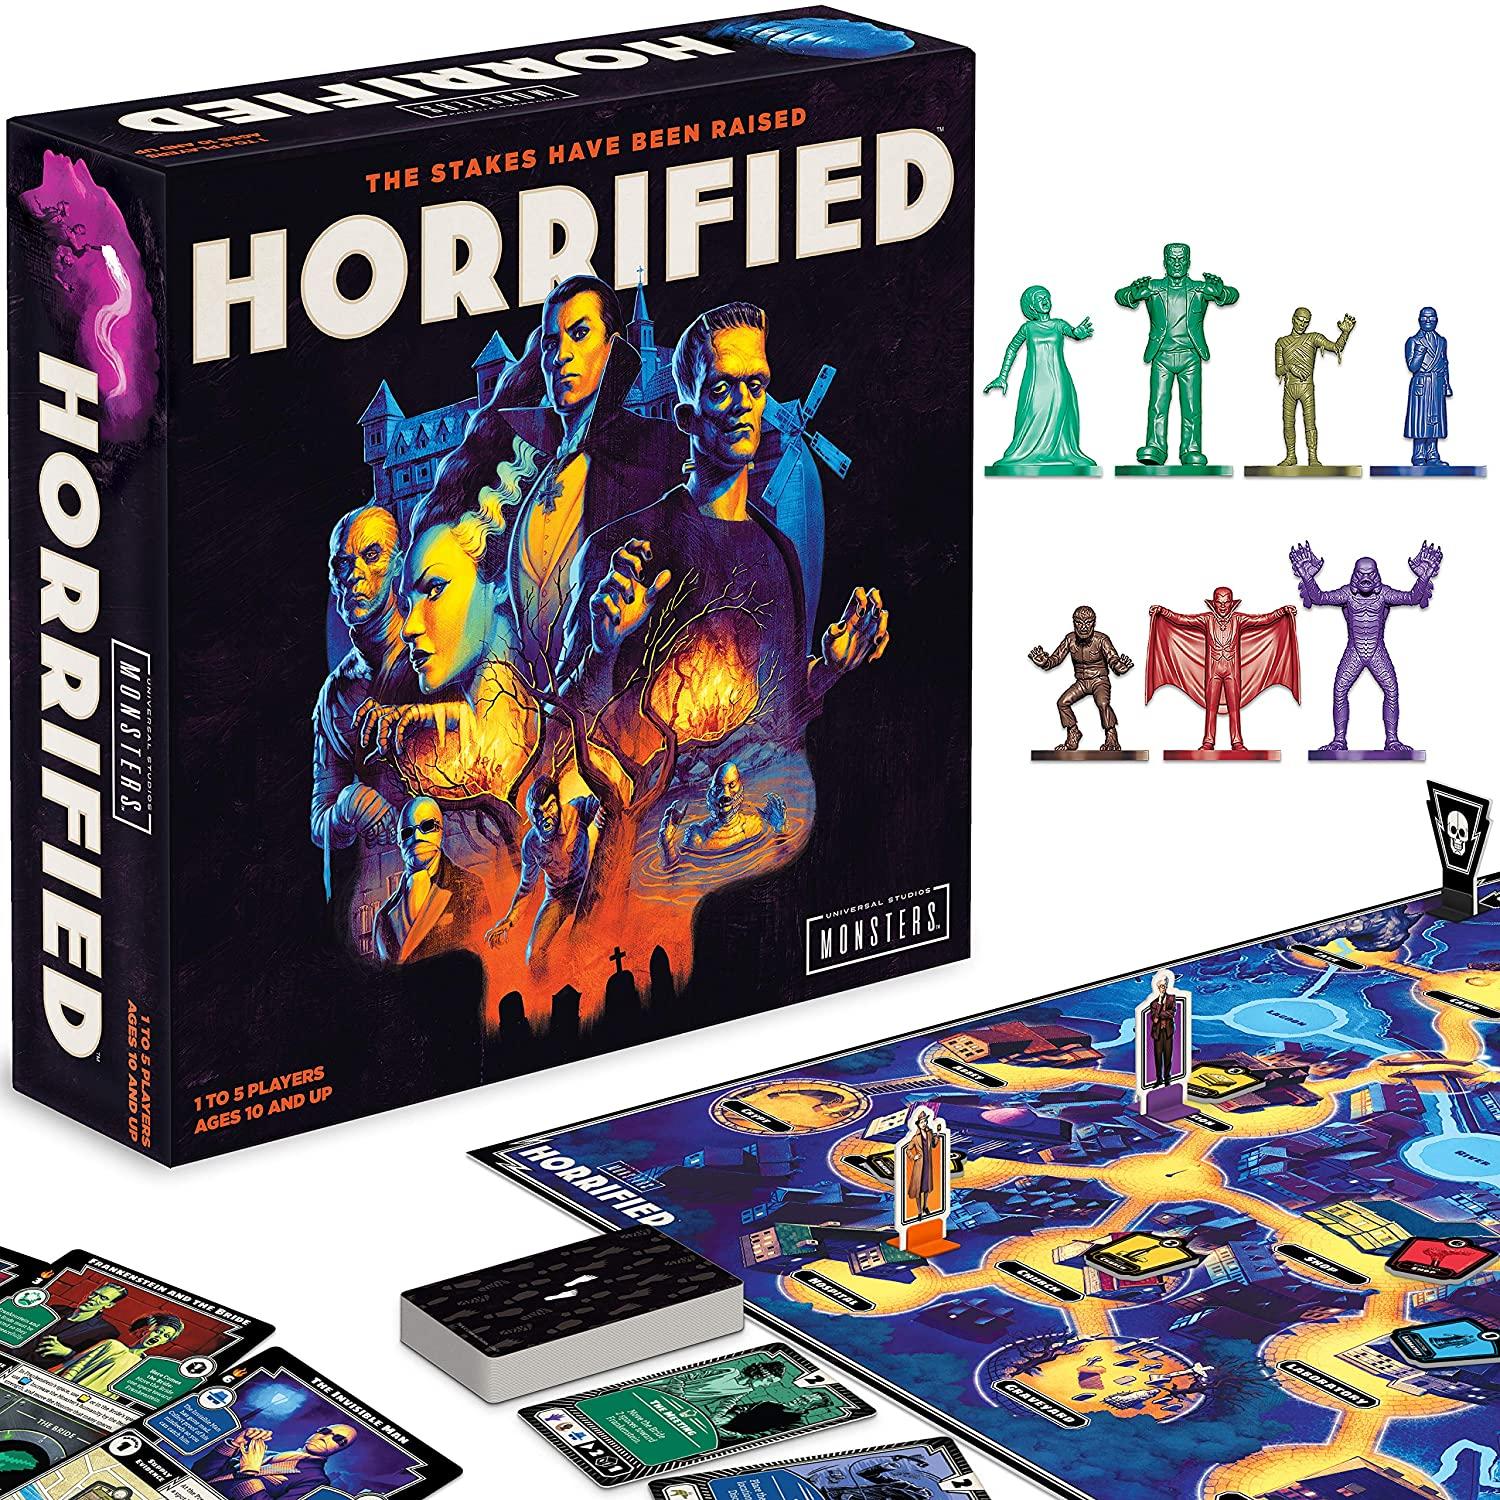 Ravensburger Horrified Universal Monsters Strategy Board Game for $17.99